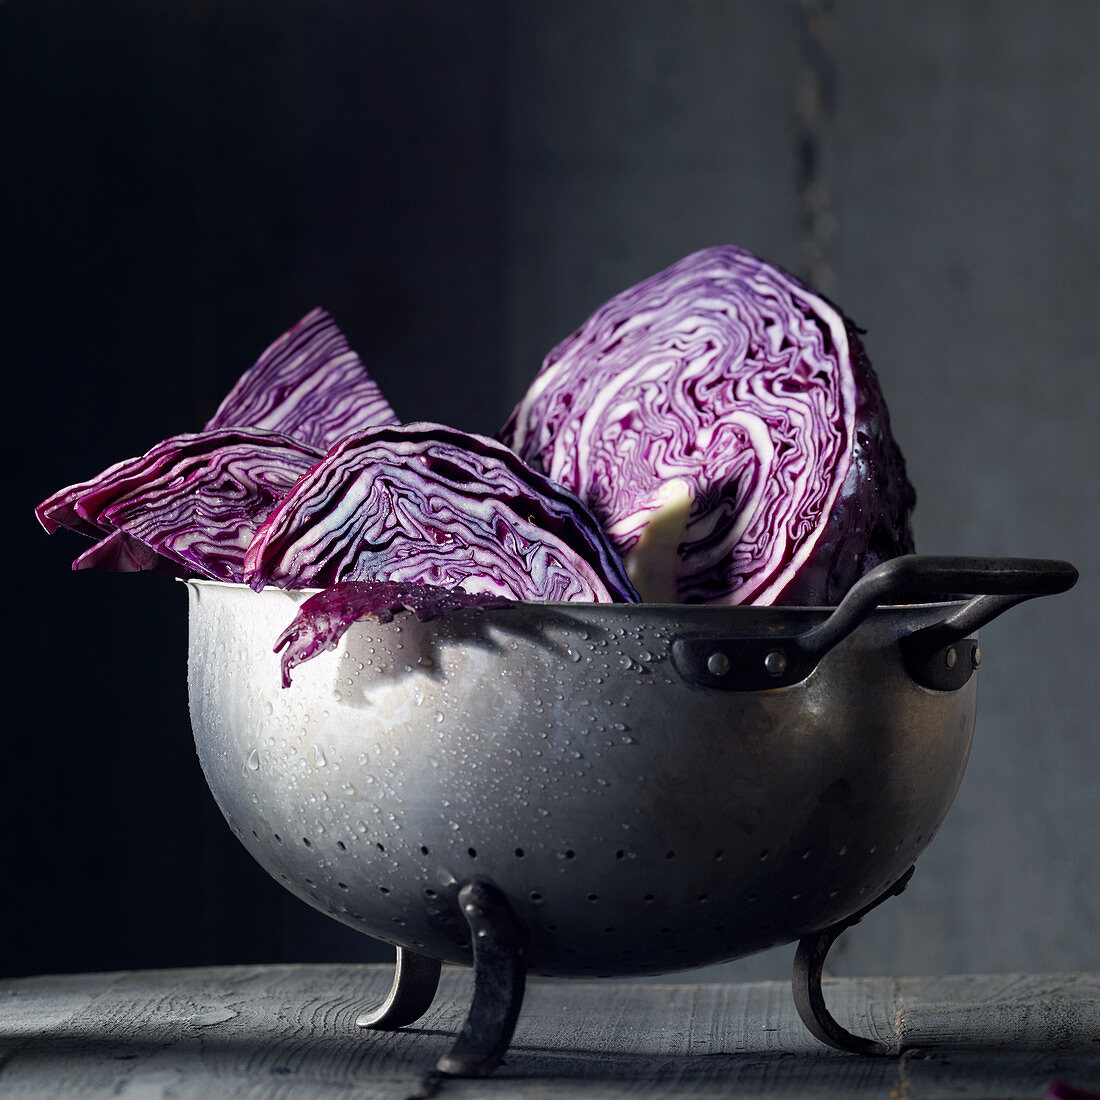 Red cabbage pieces with drops of water in an old metal colander